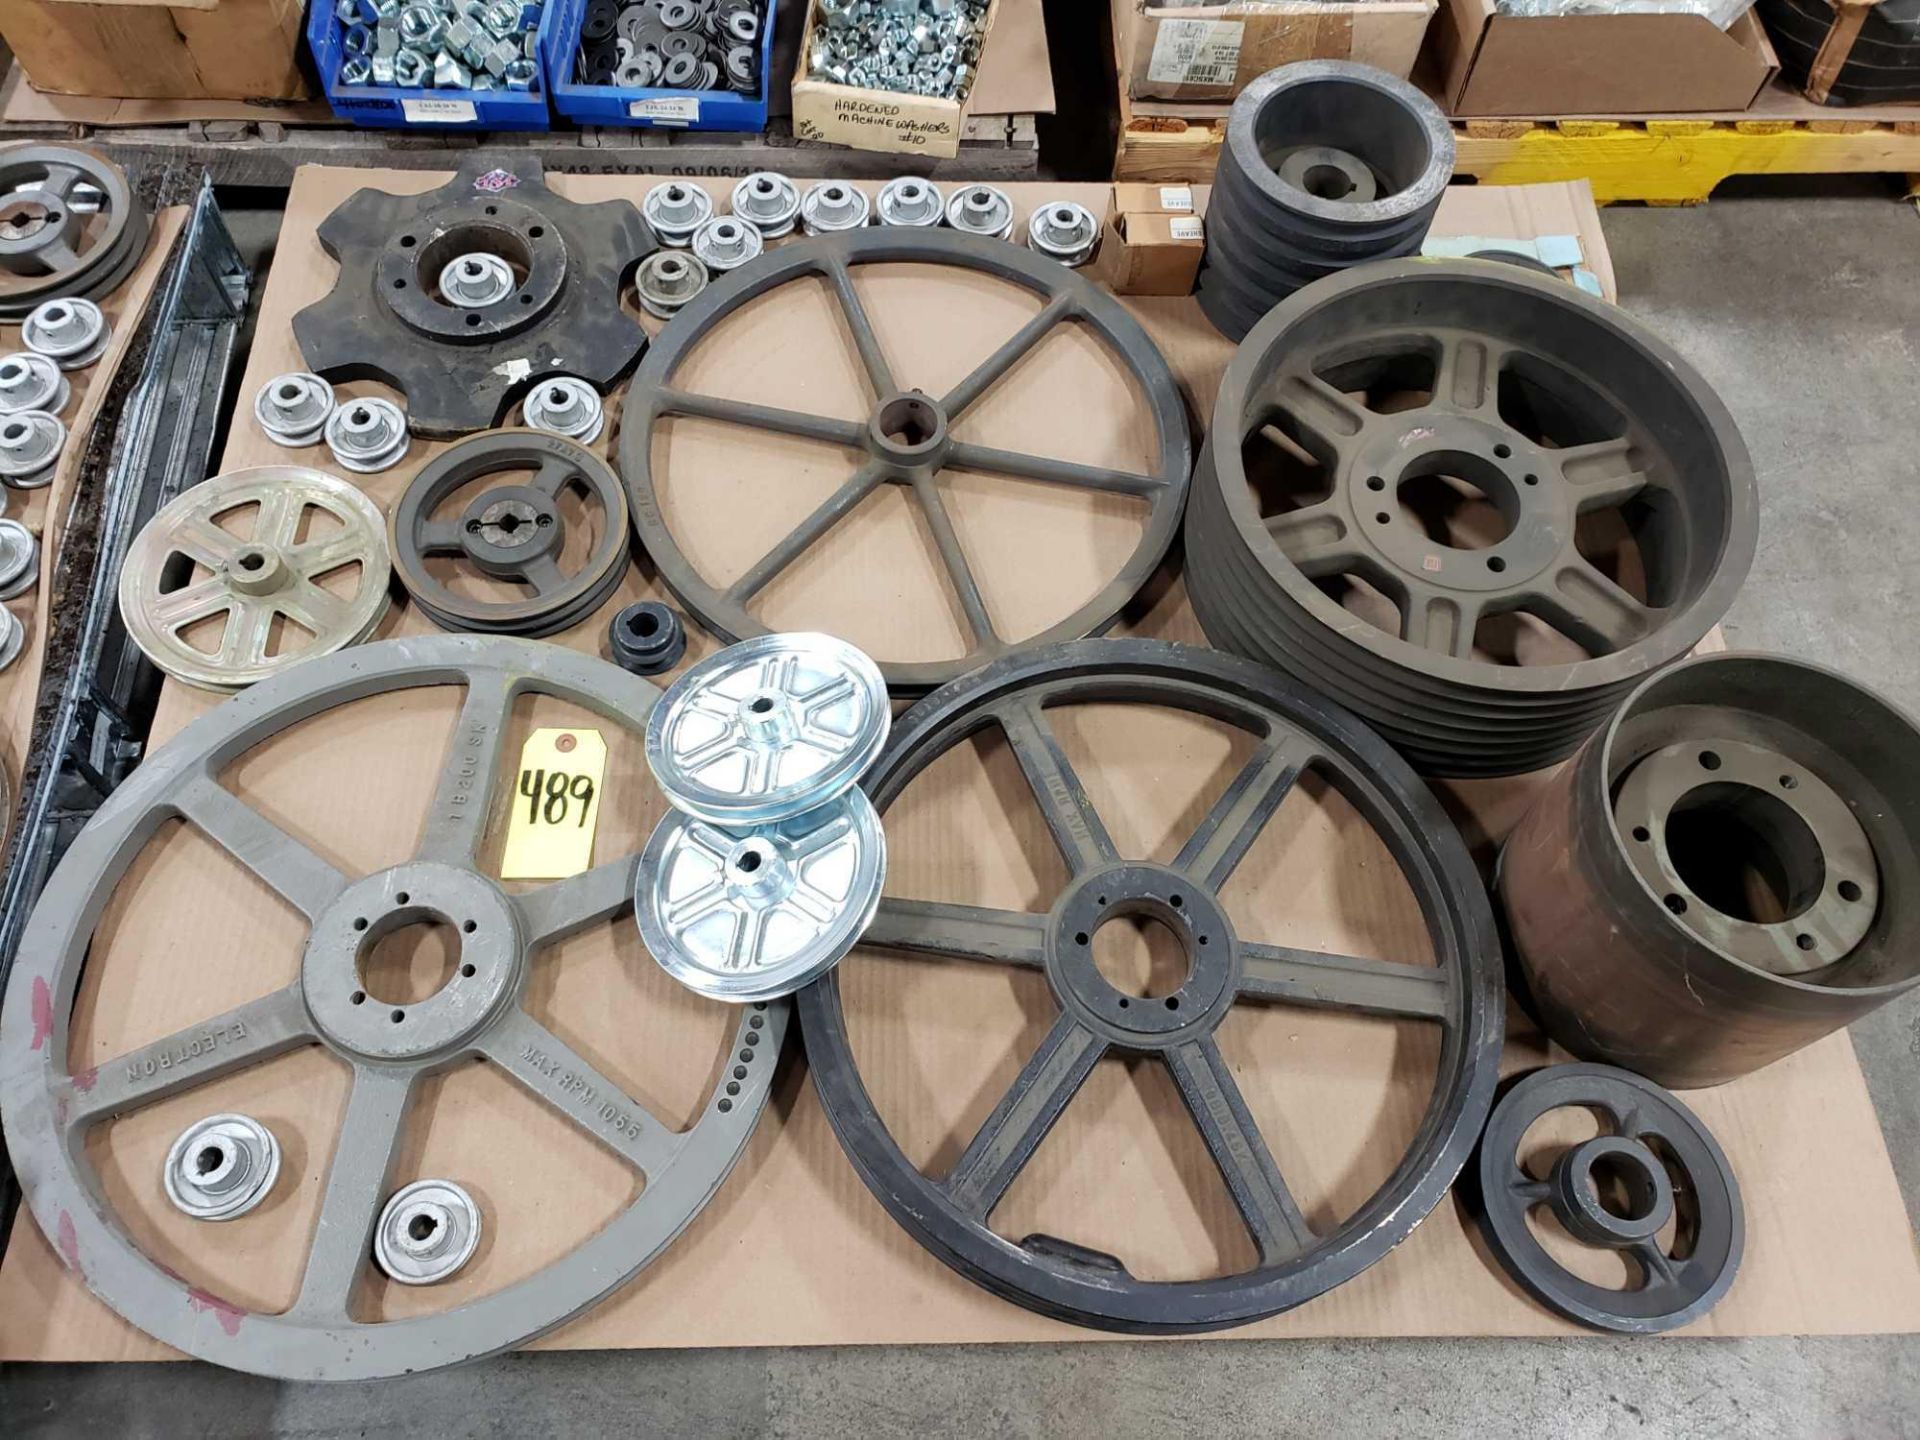 Pallet of assorted sprockets and gears.